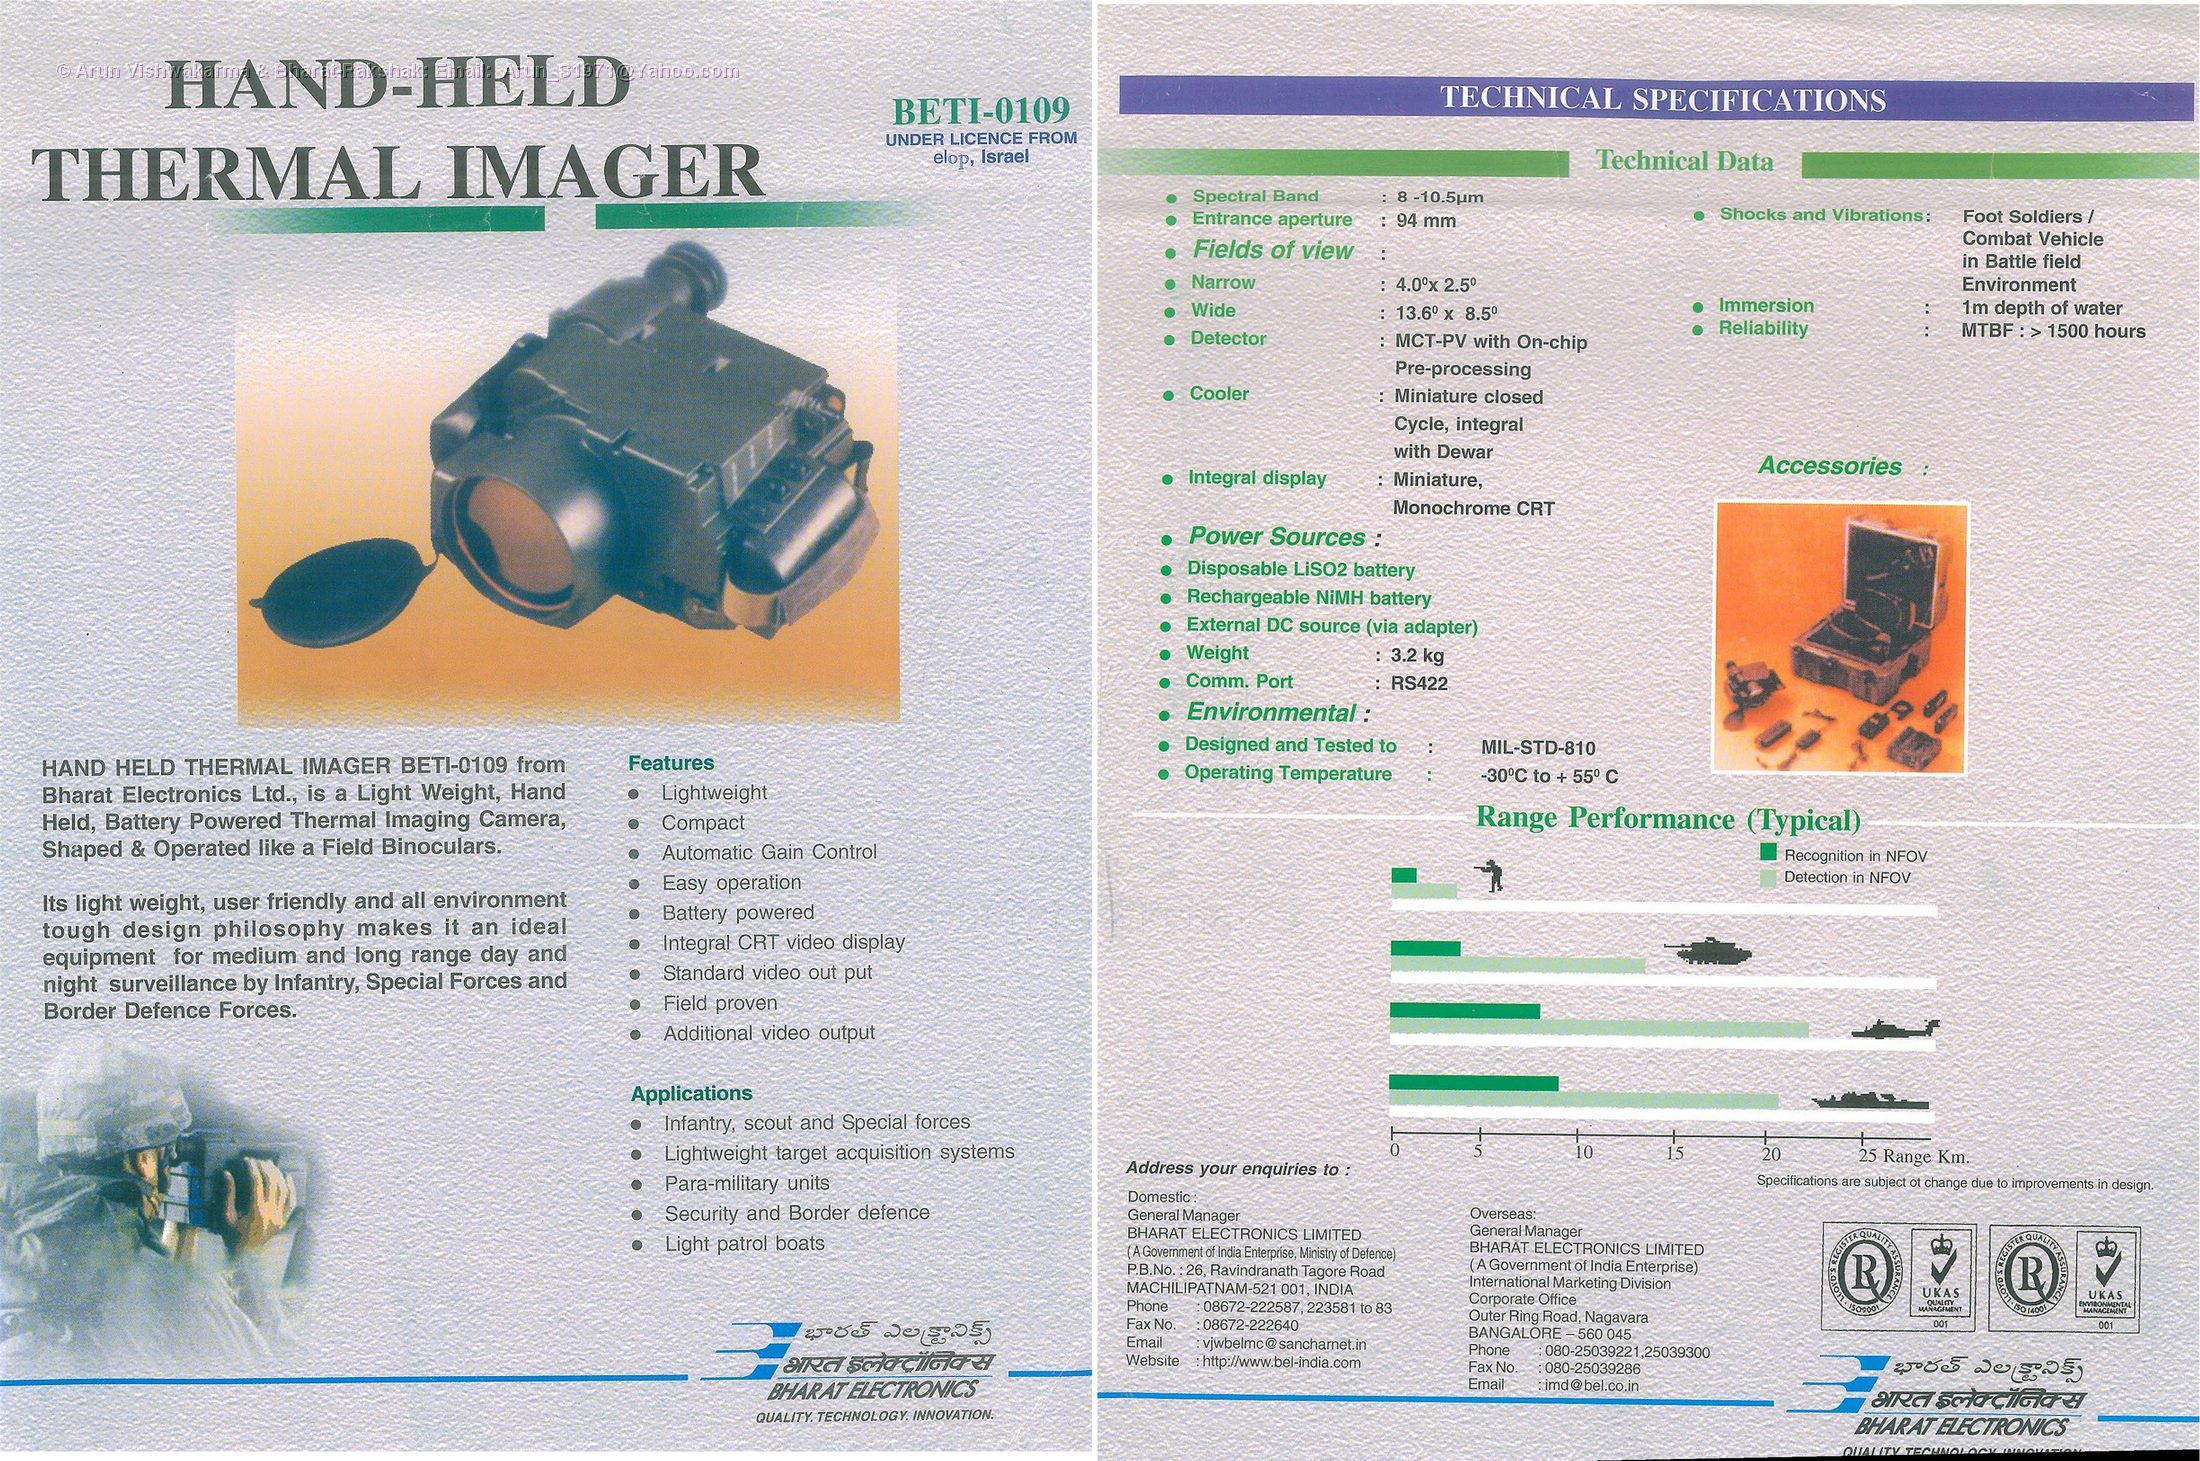 Hand-Held Thernal Imager BETI-0109